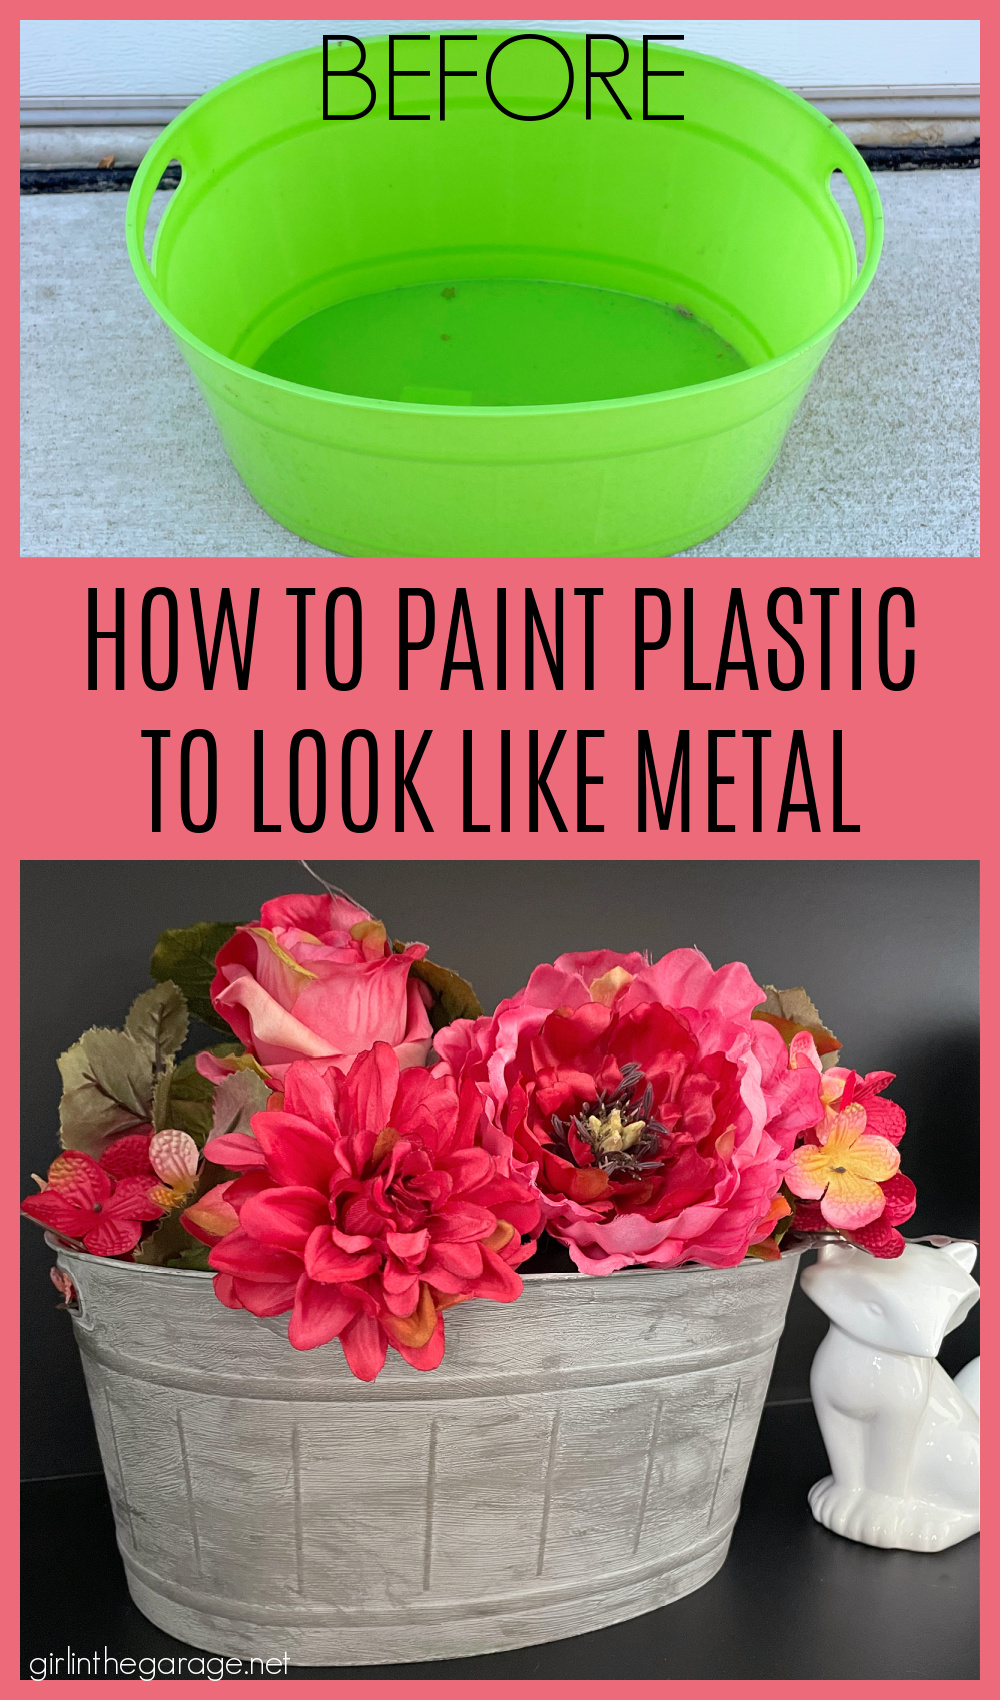 How to make a plastic bucket look like aged metal - Girl in the Garage